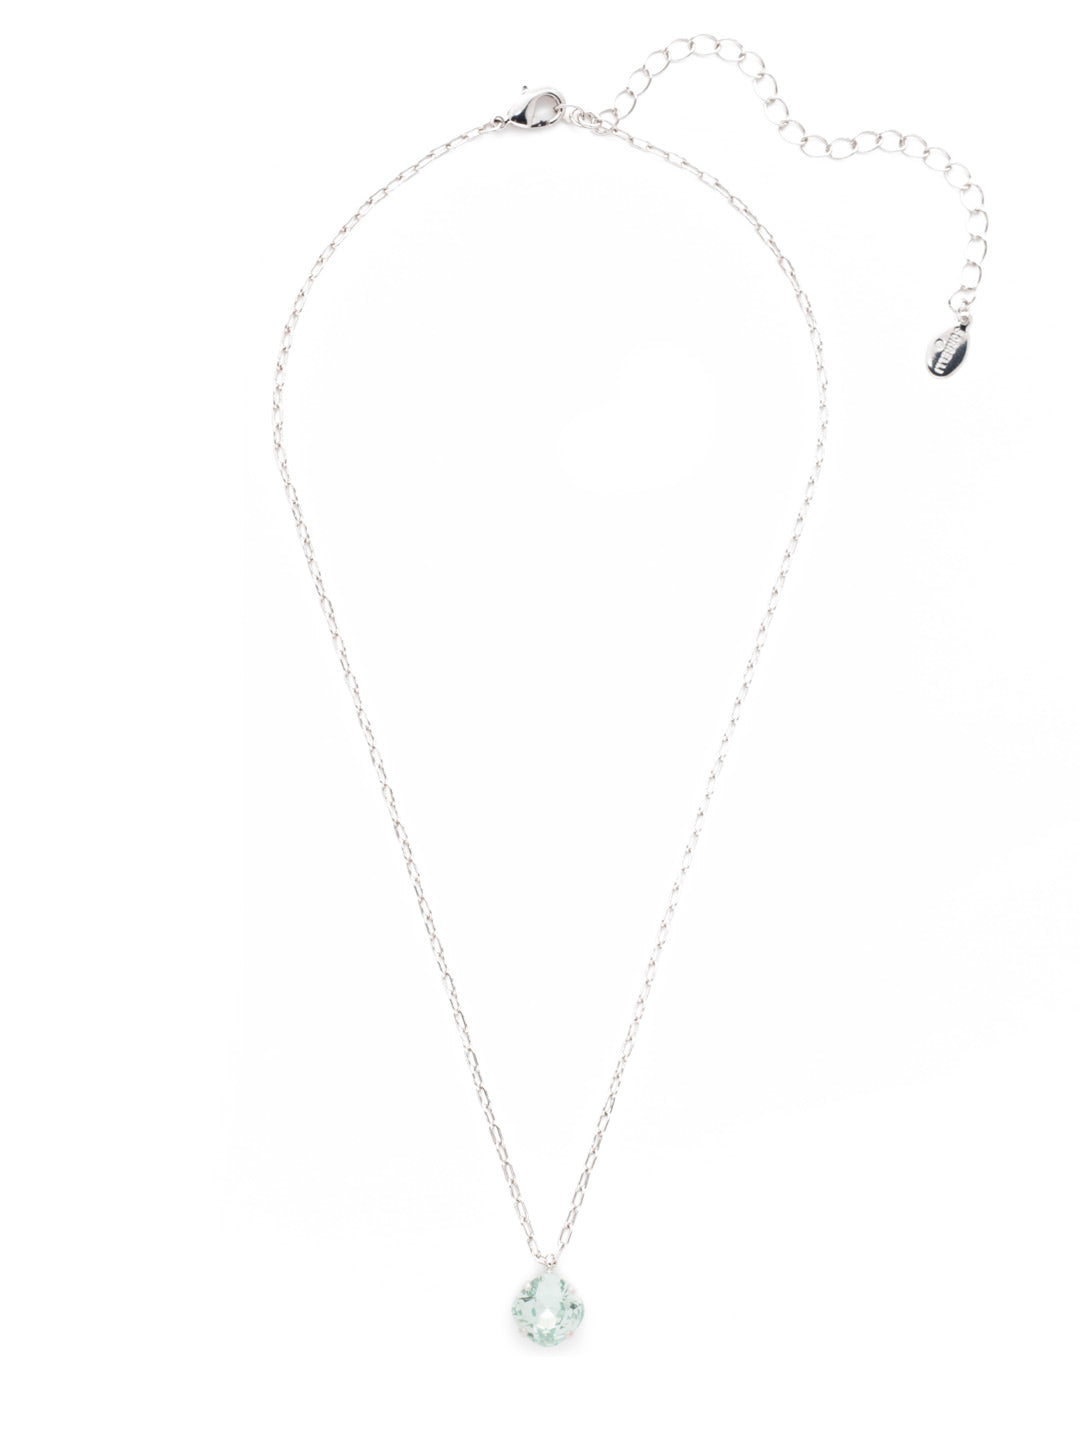 Siren Pendant Necklace - NEP22RHMIN - With a cushion-cut crystal and delicate chain, the Siren Pendant  will add a litle sparkle to your everyday look. From Sorrelli's Mint collection in our Palladium Silver-tone finish.